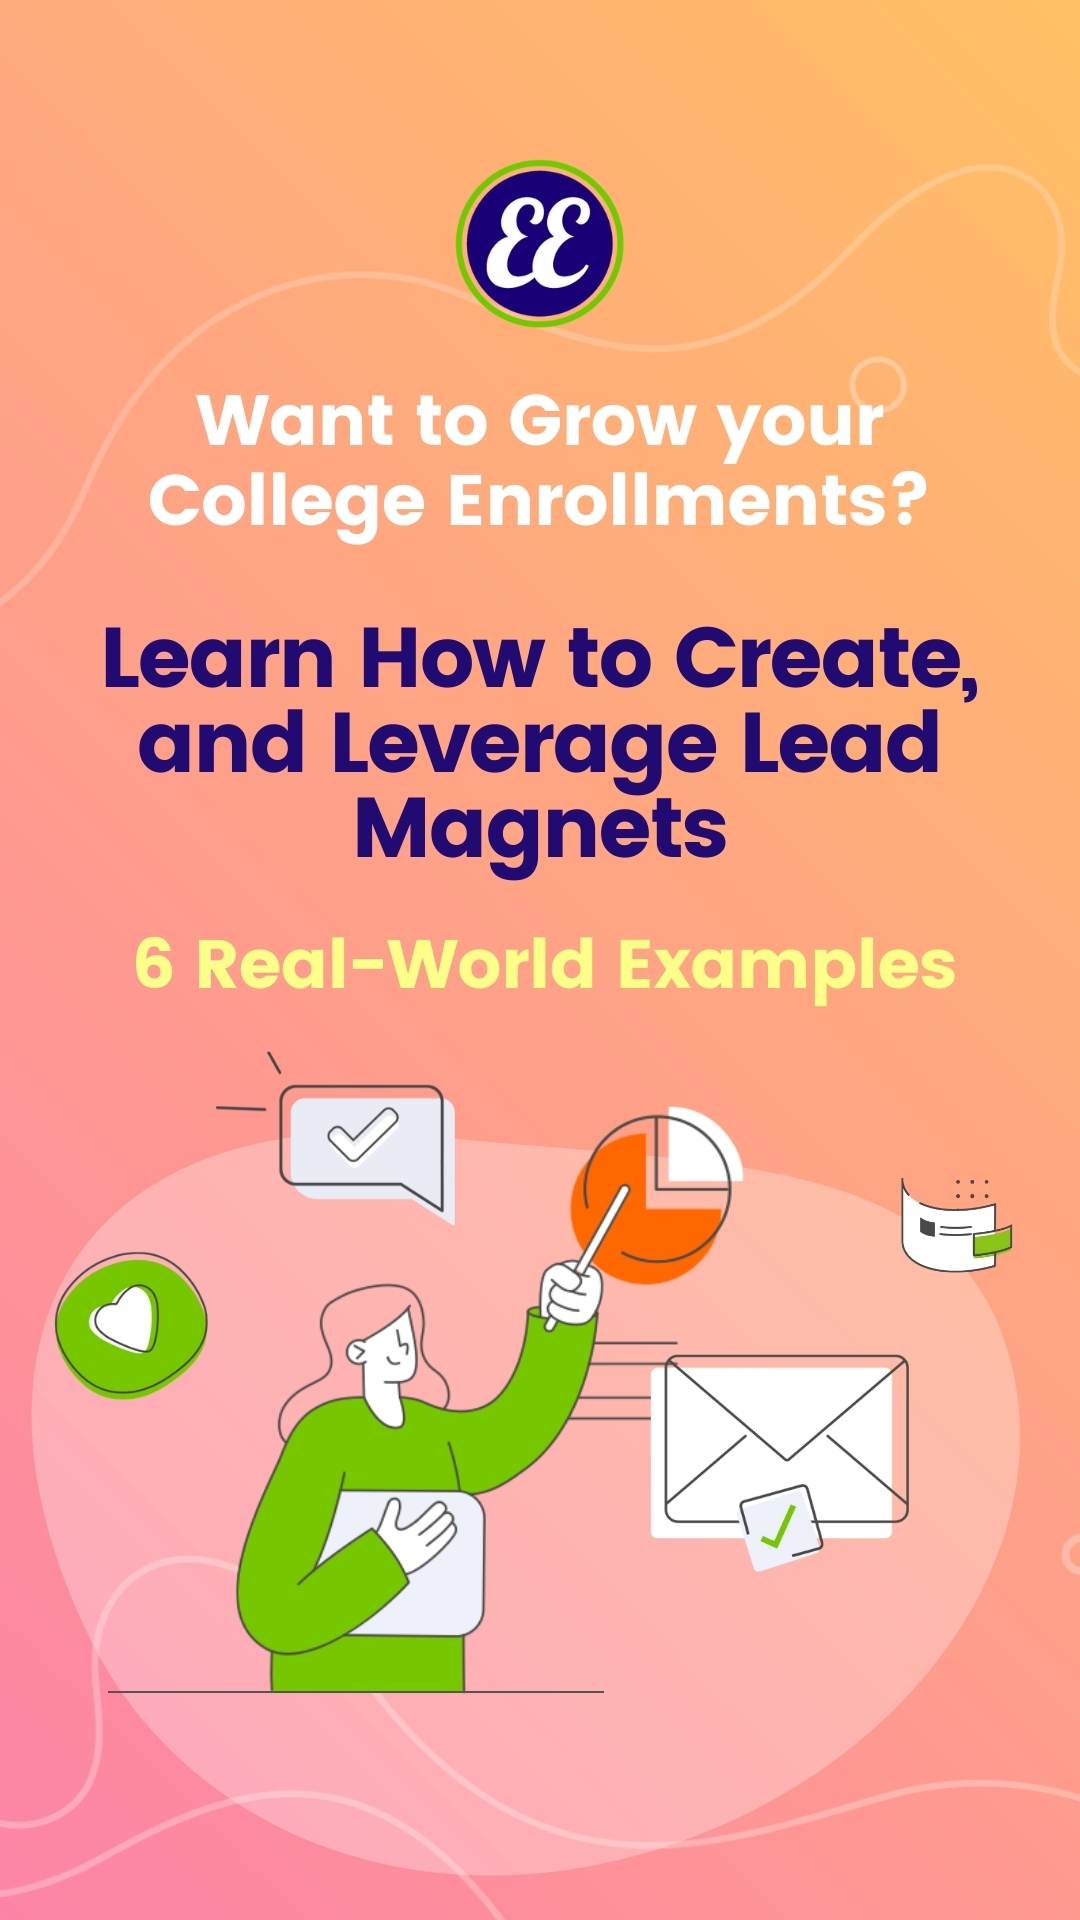 Higher Ed Lead Magnet Examples: Want to Grow your College Enrollments